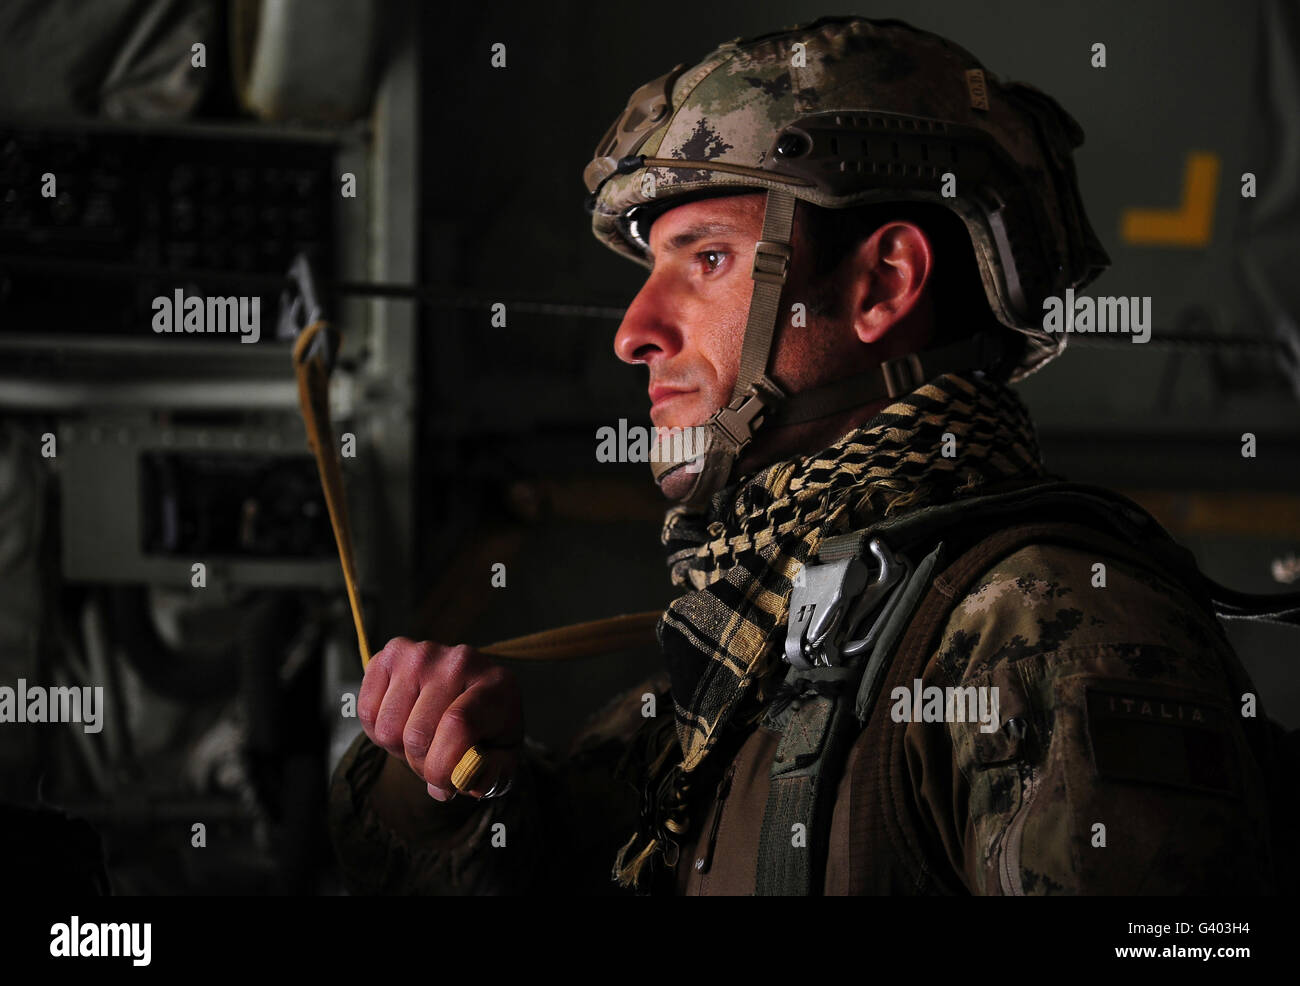 A paratrooper from the Italian Army waits for jump approval. Stock Photo